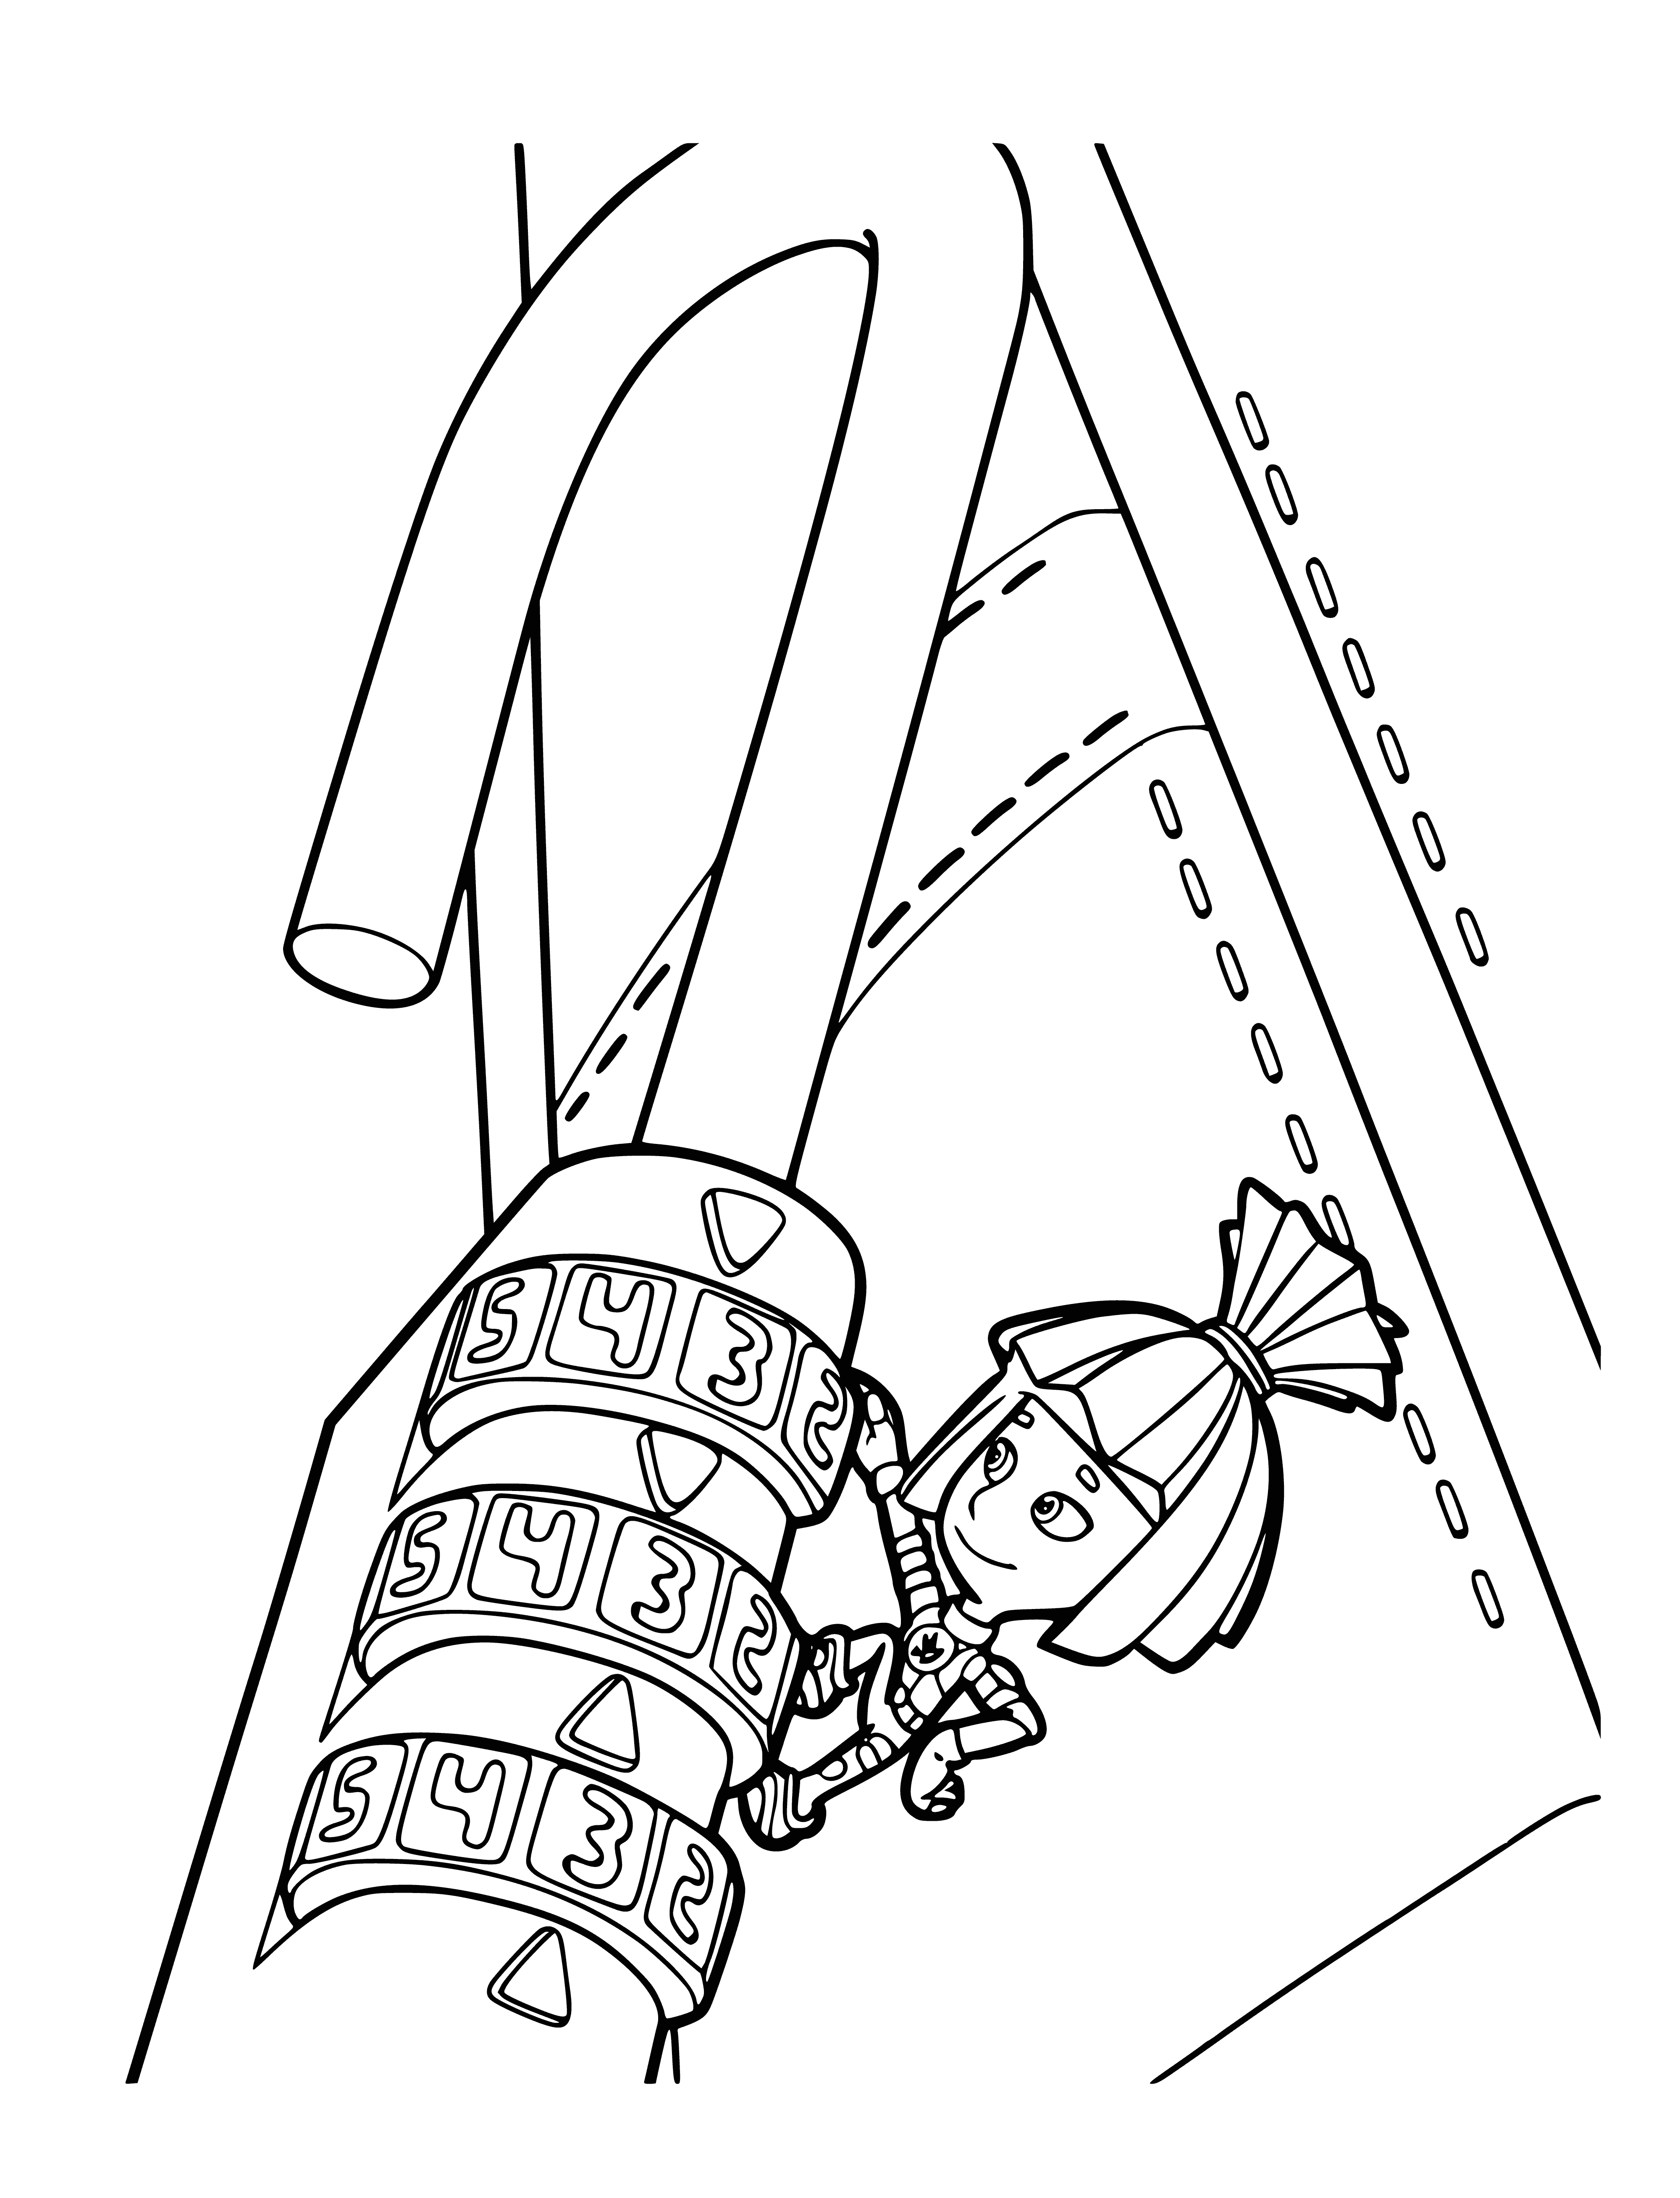 coloring page: Two Fixies in coloring page, one stands on stool & holding lock, other sits & holds Simka. #coloring